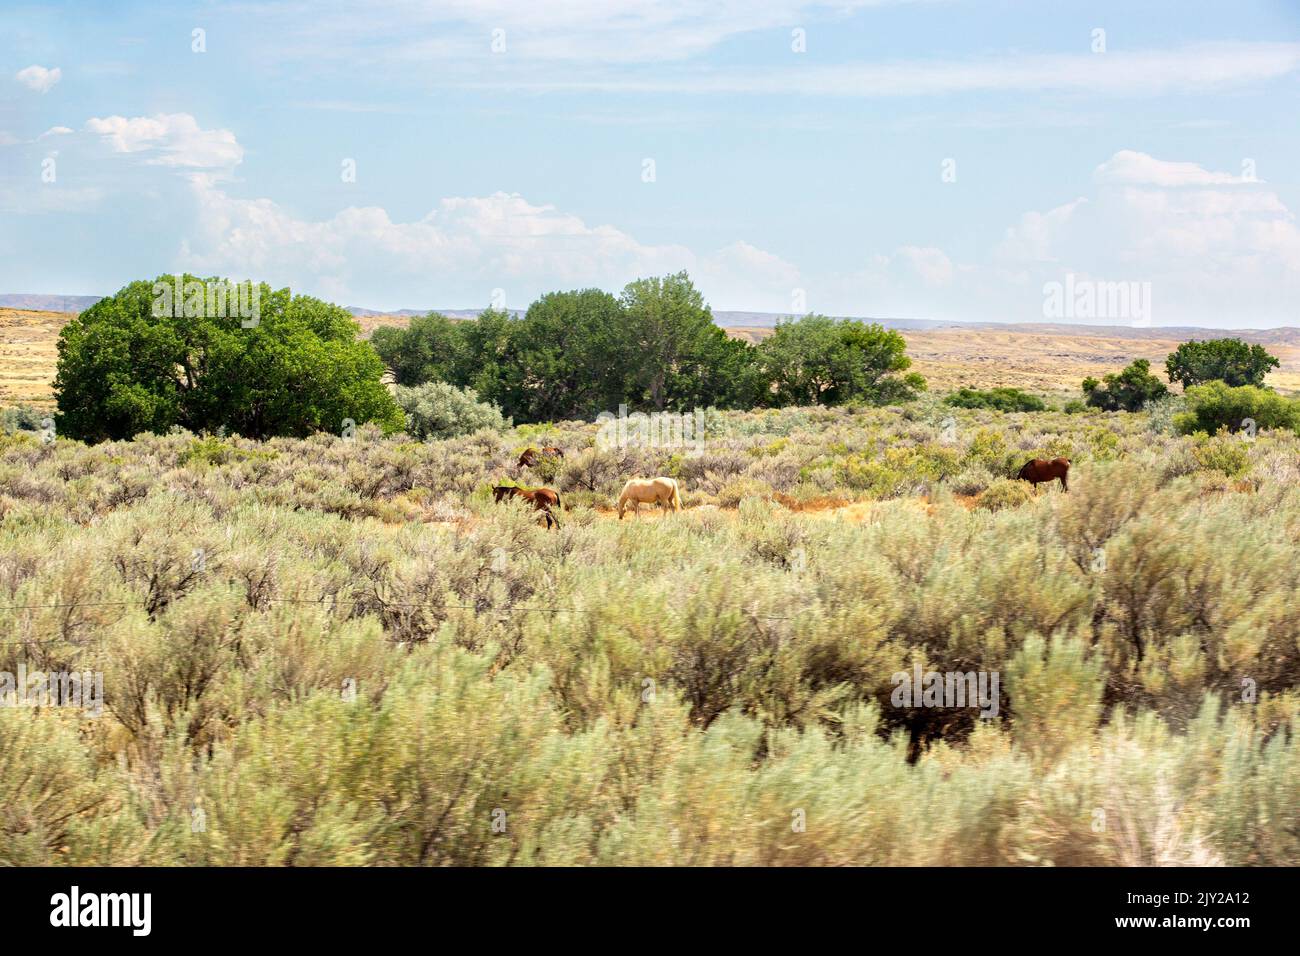 Horses grazing in an arid ranch sagebrush steppe landscape with sage brush and trees north of Cody, Wyoming Stock Photo